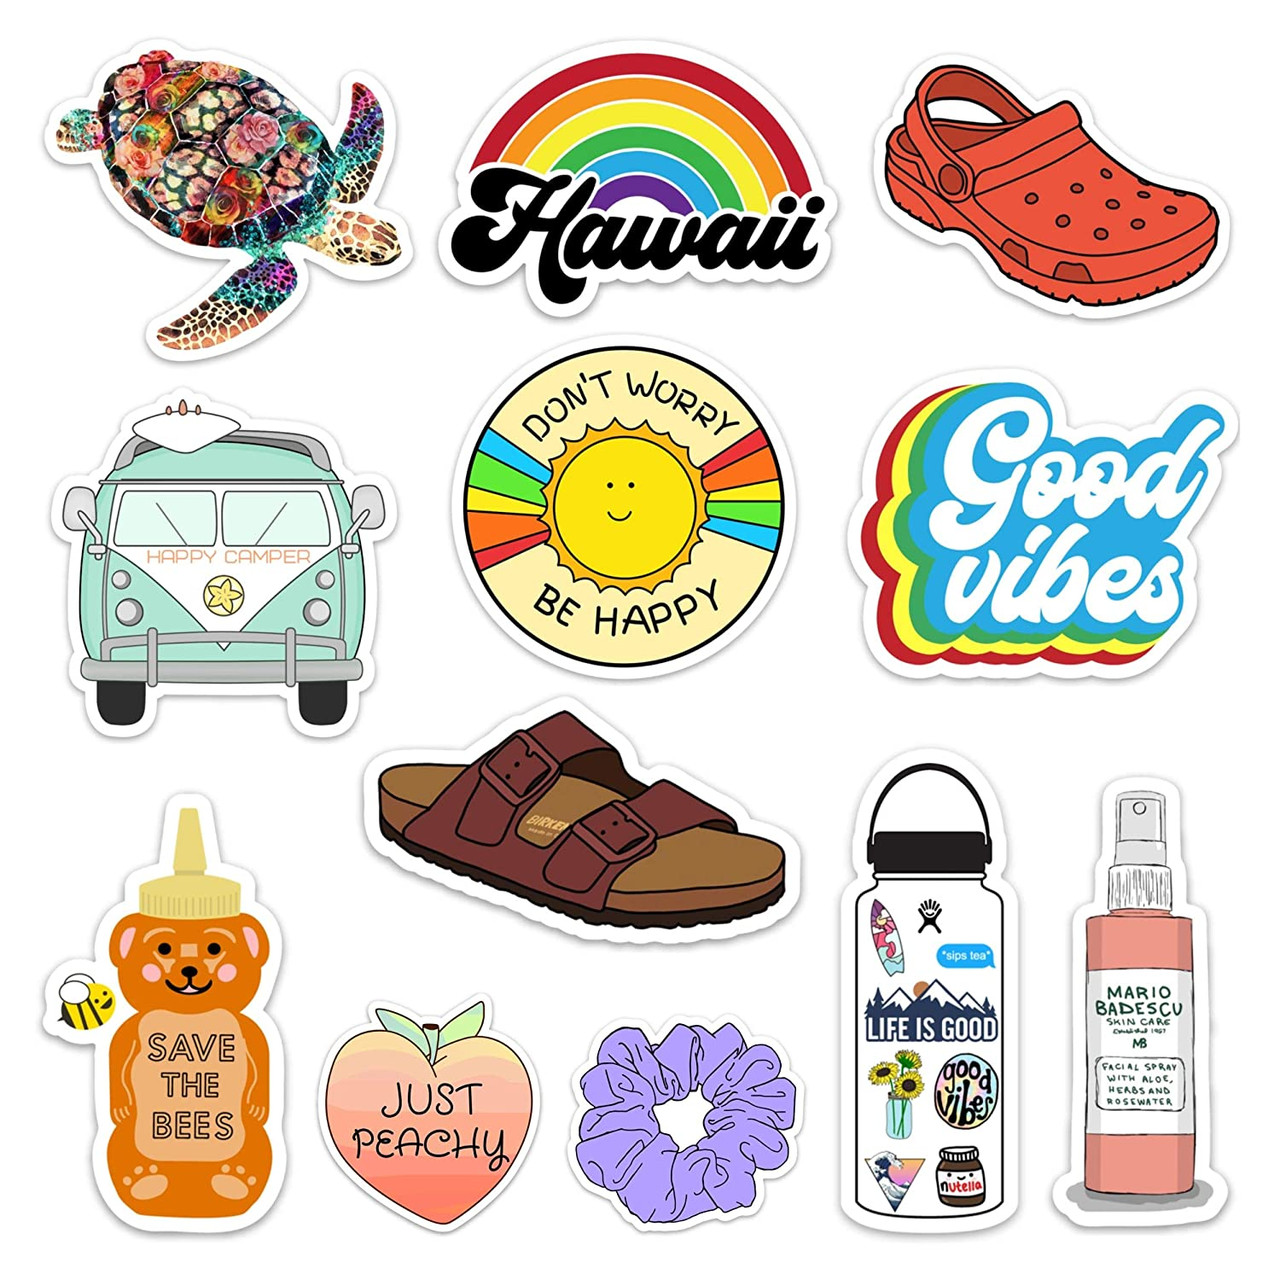 VSCO Stickers for Hydro Flask Stickers - Waterproof VSCO Stickers for  Hydroflask, Laptop Stickers - Aesthetic Stickers for Water Bottles - Cute  Vinyl Stickers for Hydroflasks for VSCO Girl